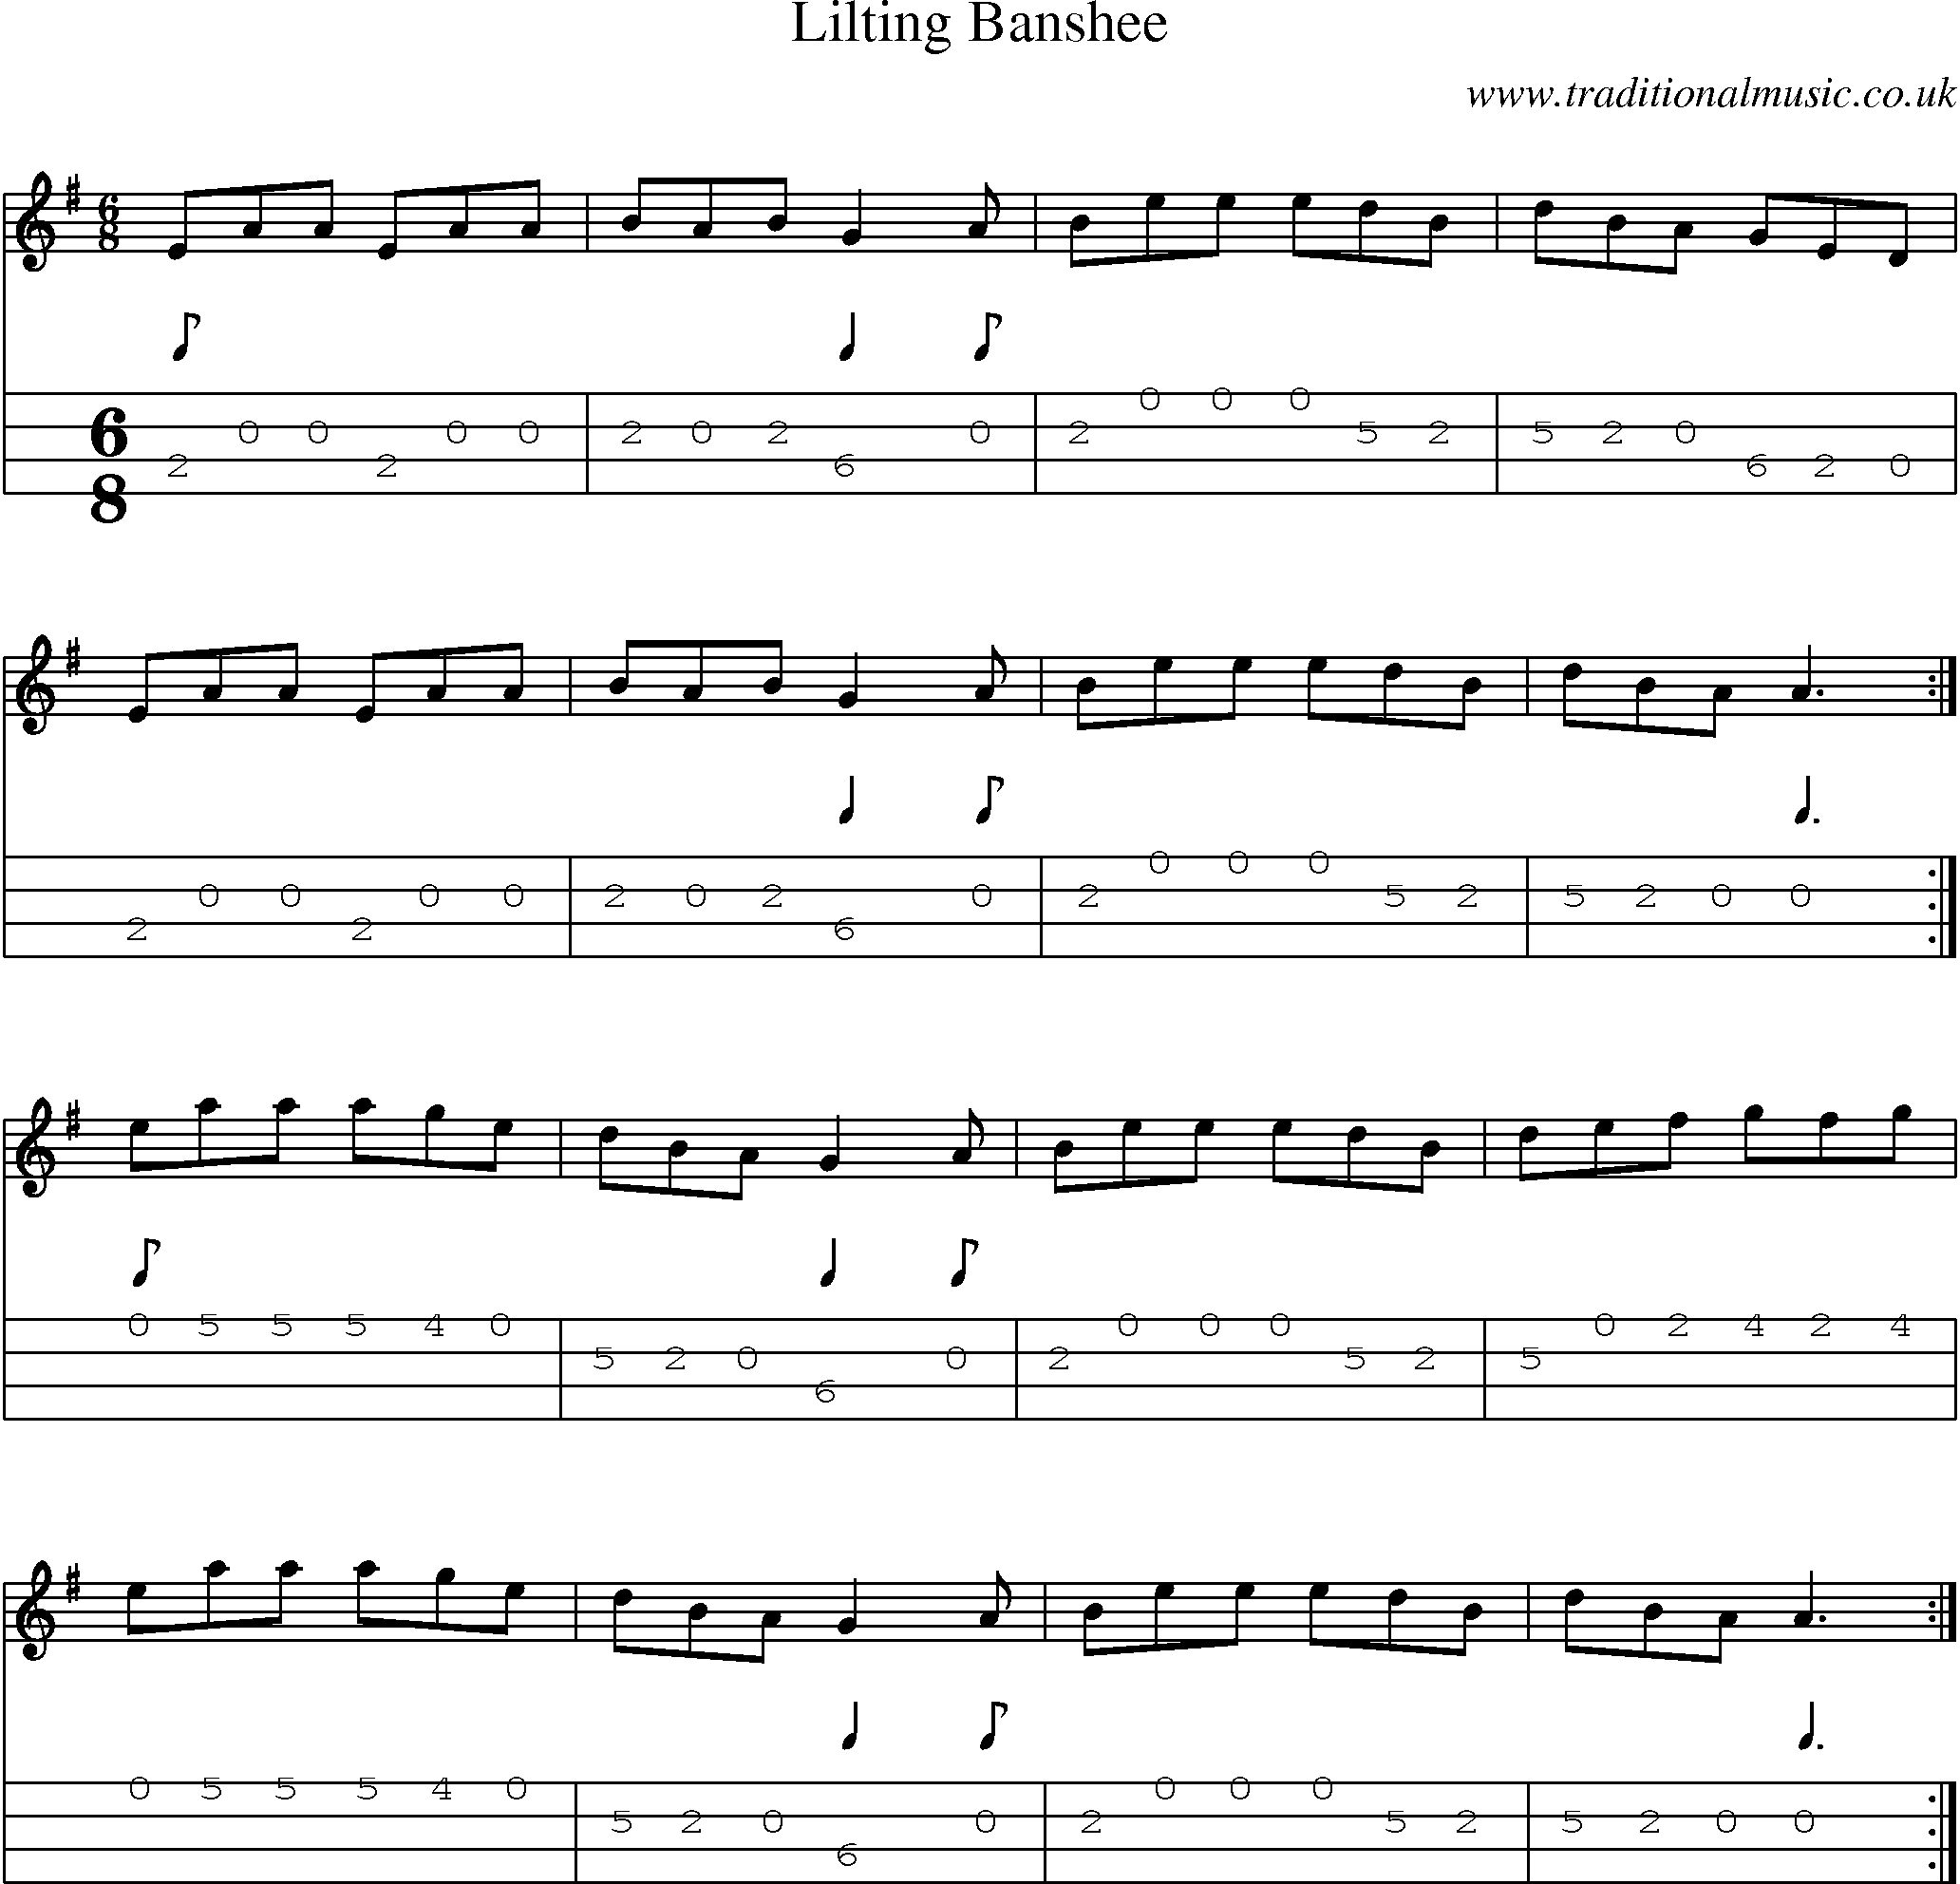 Music Score and Mandolin Tabs for Lilting Banshee